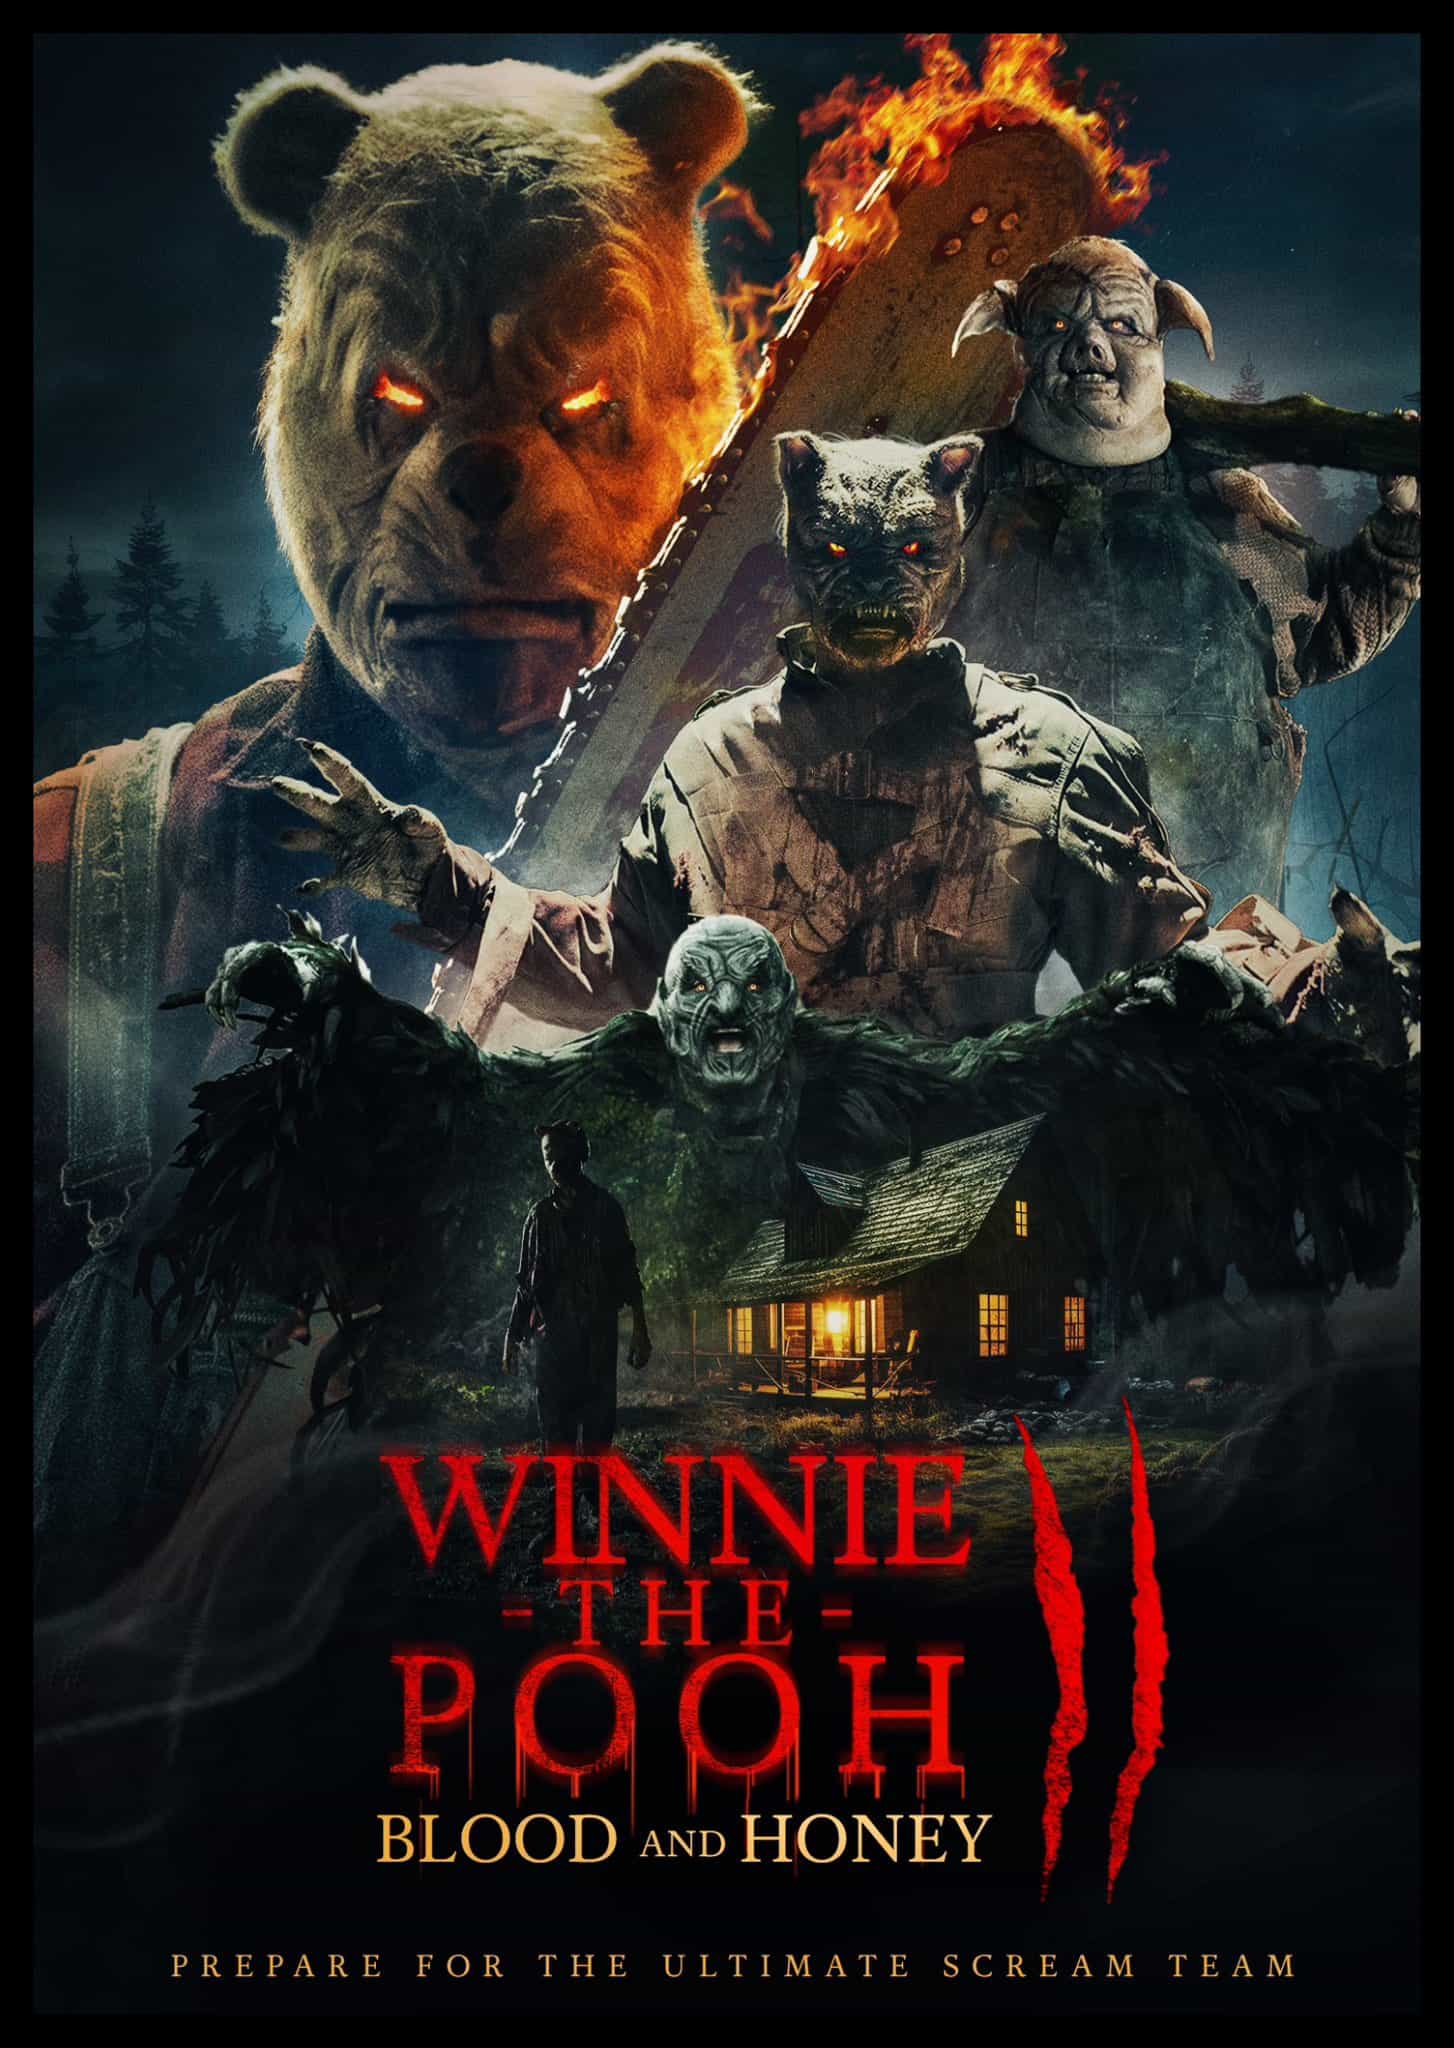 Check out the new trailer and poster for upcoming movie Winnie-The-Pooh: Blood and Honey 2 which stars Scott Chambers and Ryan Oliva - movie UK release date 14th February 2024 #winniethepoohbloodandhoney2